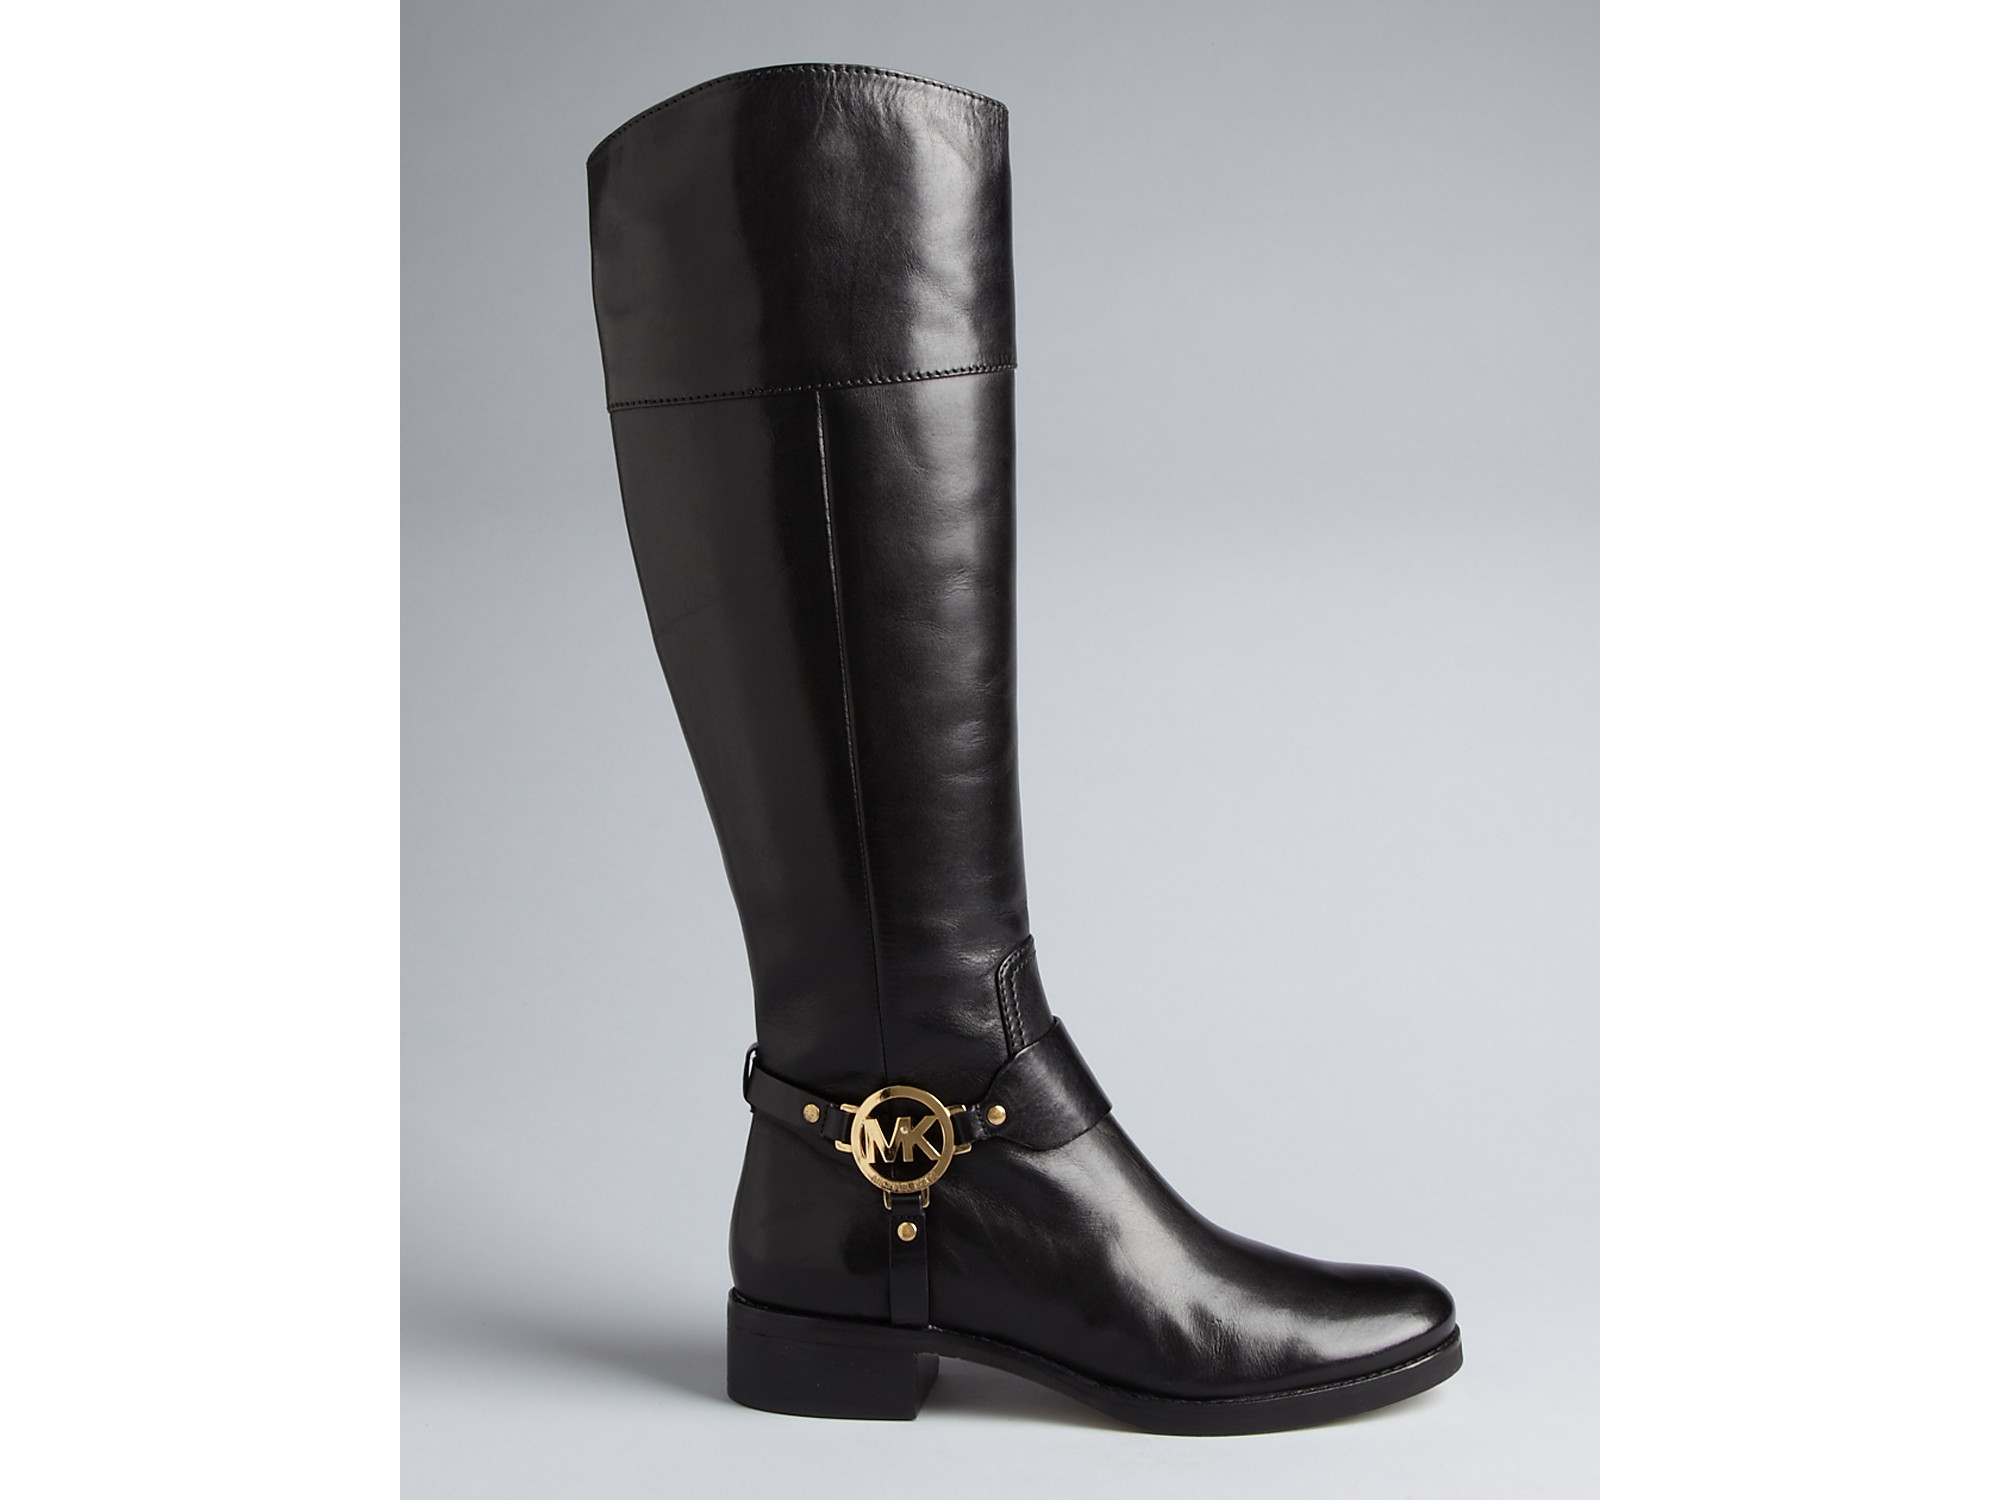 Lyst - Michael Kors Michael Harness Riding Boots Fulton in Brown